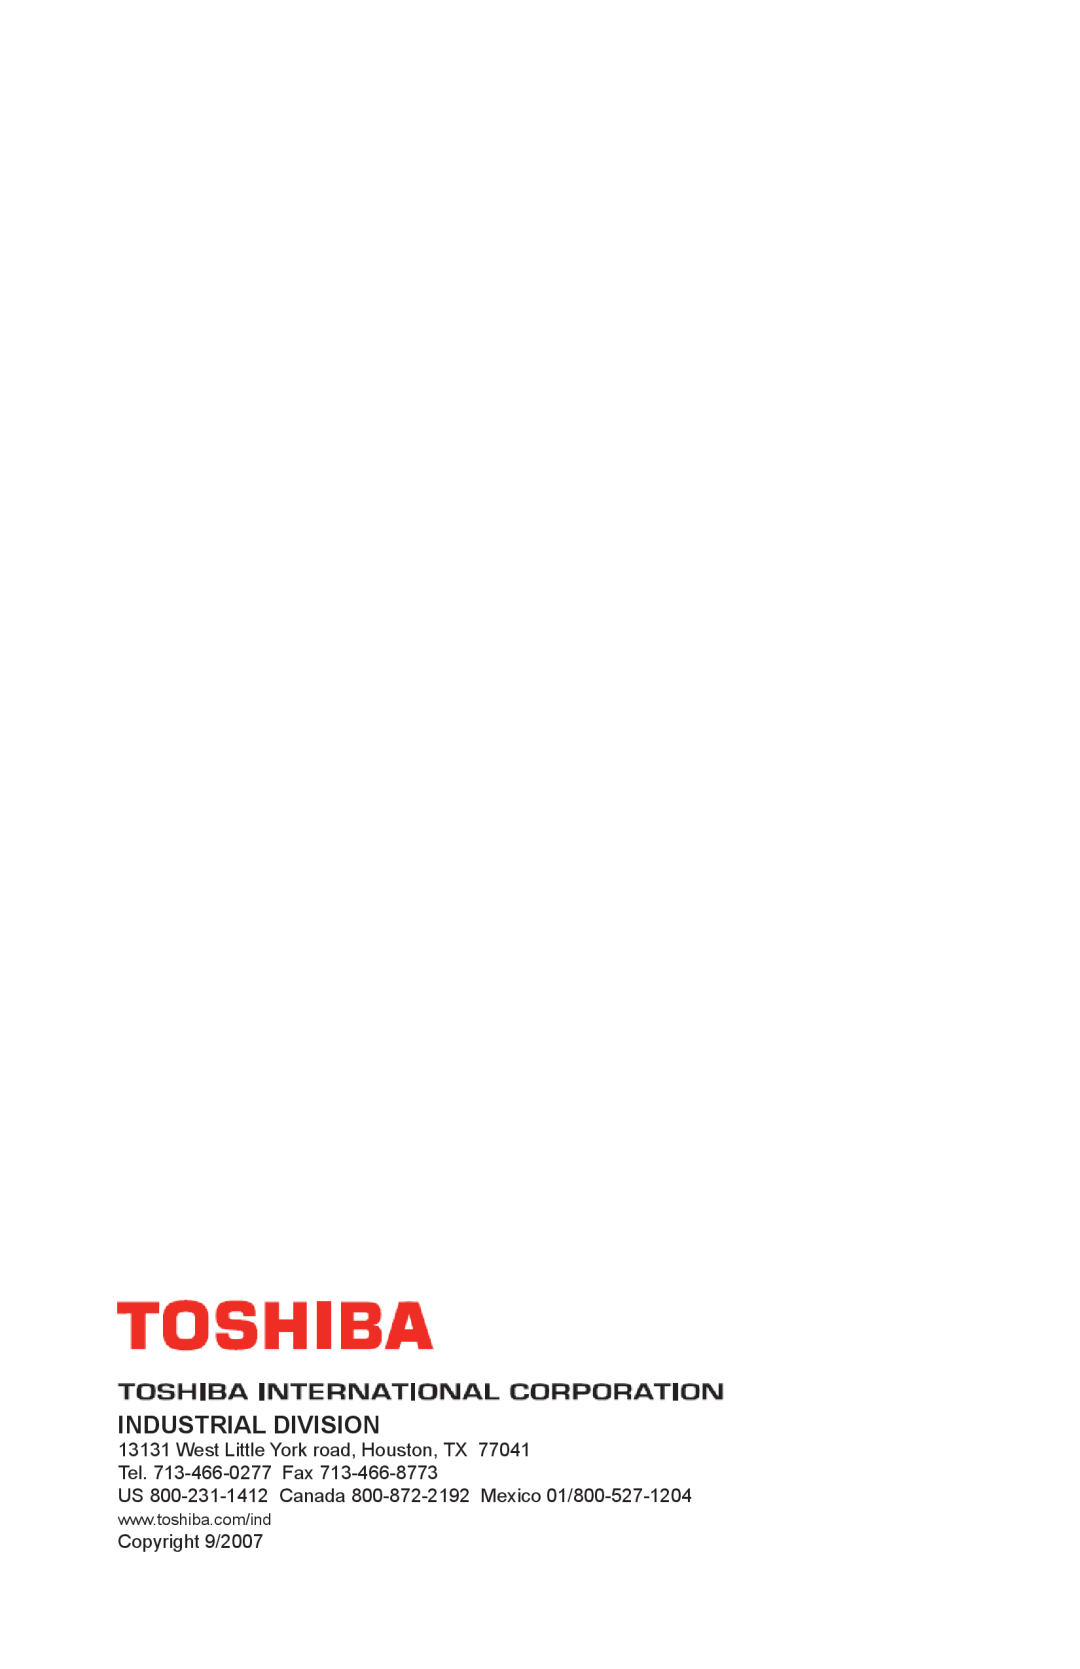 Toshiba 1800 manual Industrial Division, West Little York road, Houston, TX 77041 Tel. 713-466-0277 Fax, Copyright 9/2007 